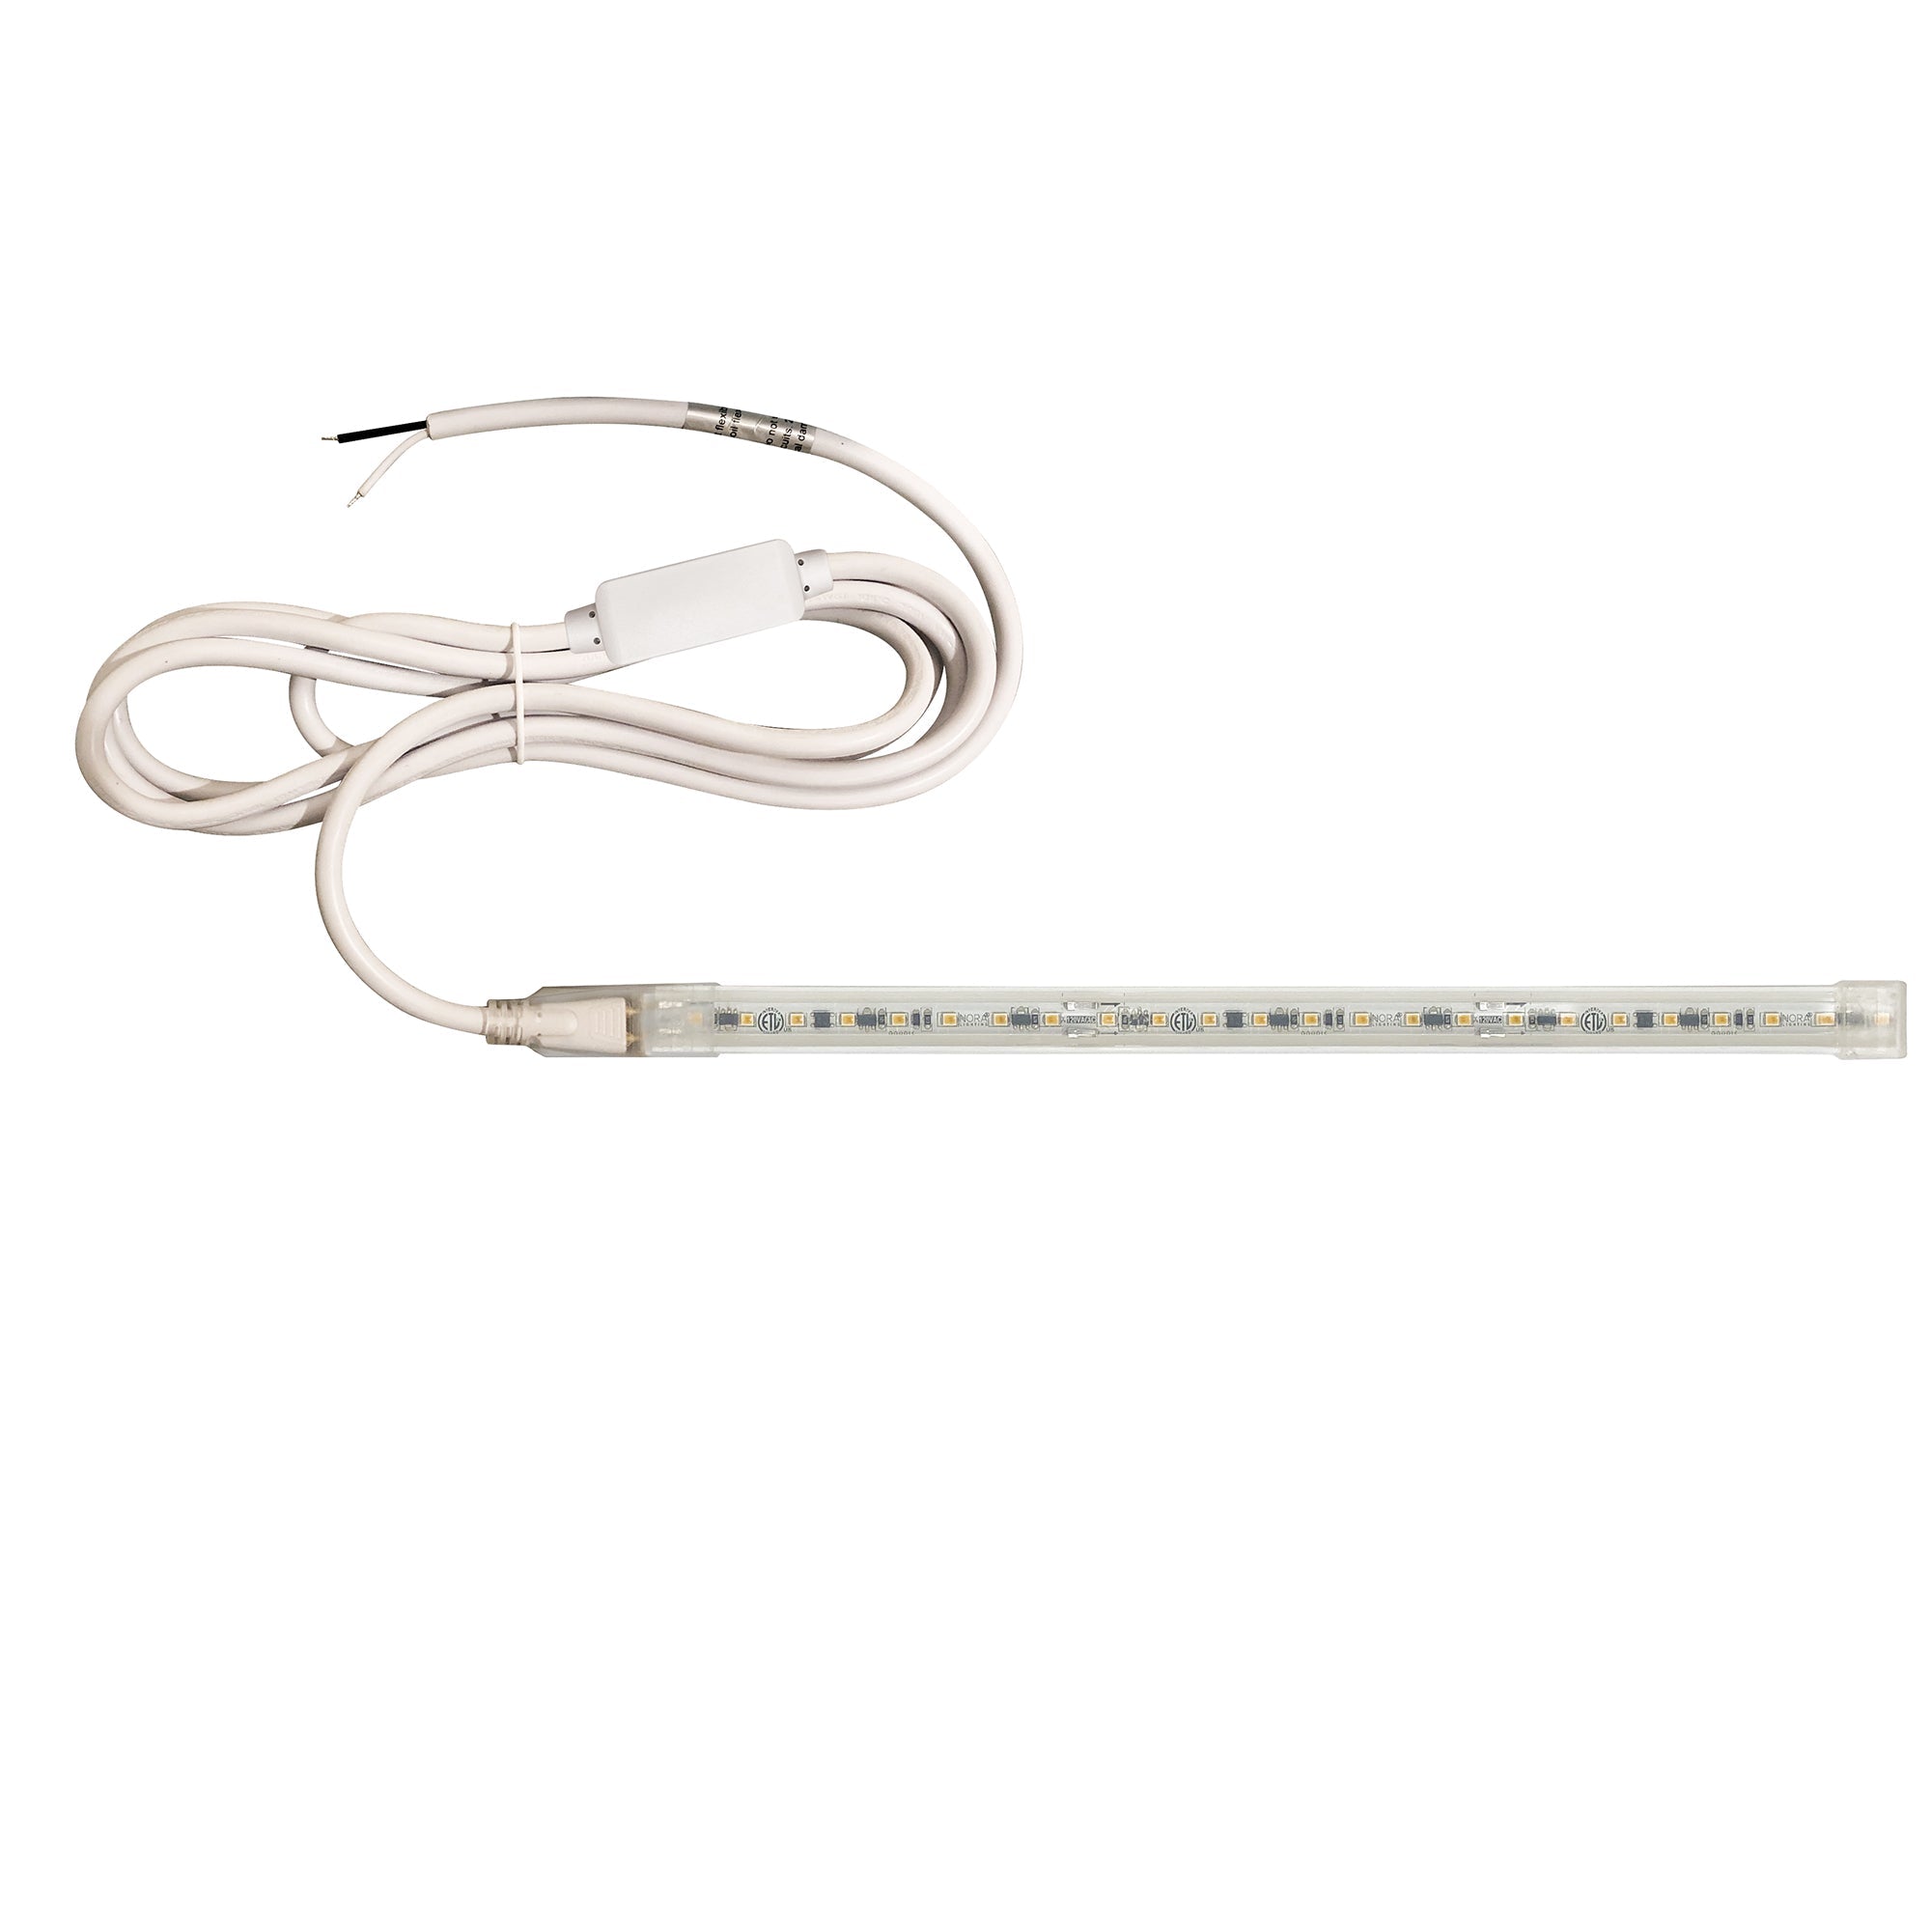 Nora Lighting NUTP13-W95-12-940/HWSP - Accent / Undercabinet - Custom Cut 95-ft 120V Continuous LED Tape Light, 330lm / 3.6W per foot, 4000K, w/ Mounting Clips and 8' Hardwired Power Cord w/ Surge Protector